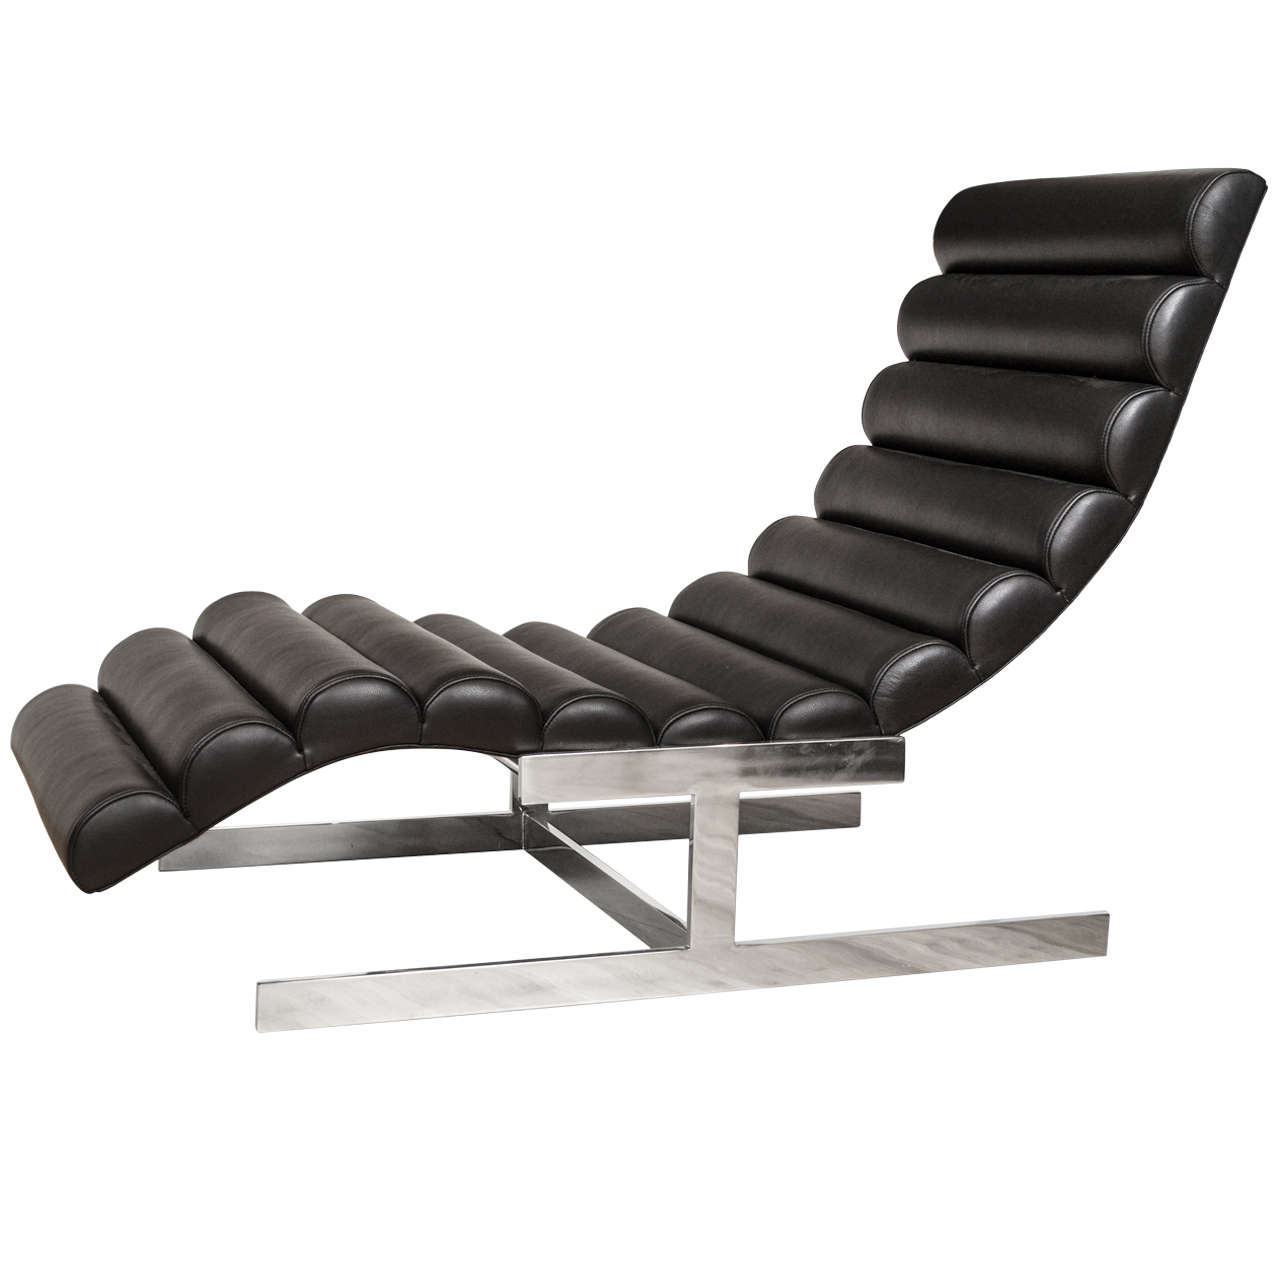 Sculpted chaise longue on a chromed steel base.
Manufactured by Carsons in the style of Milo Baughman, this beauty features tufted cushioning throughout the sinuous and generous seat. Newly re-upholstered in sumptuous black leather.